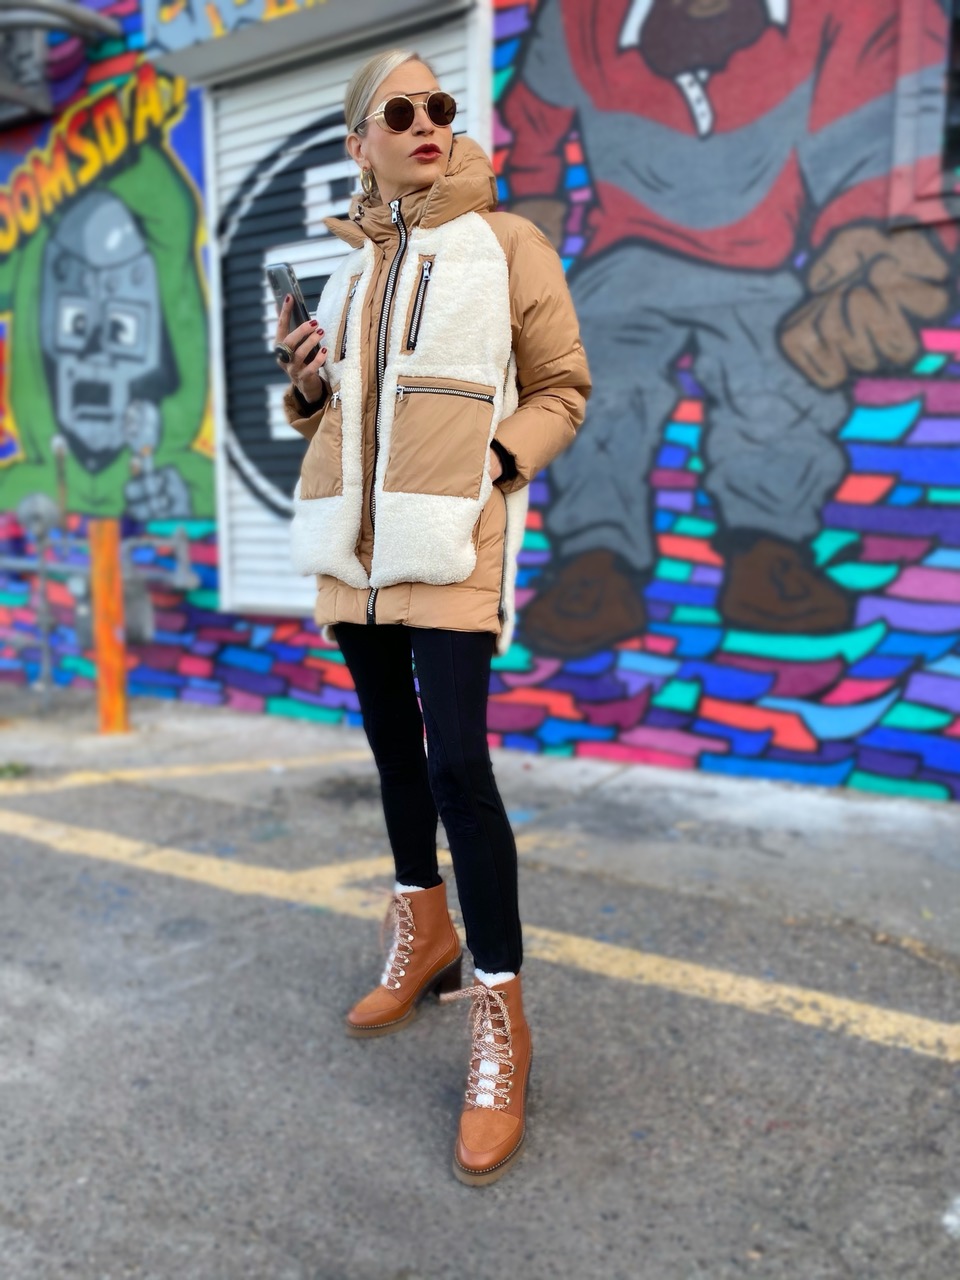 Lifestyle Influencer, Jamie Lewinger of More Than Turquoise wearing Orolay winter puffer down jacket